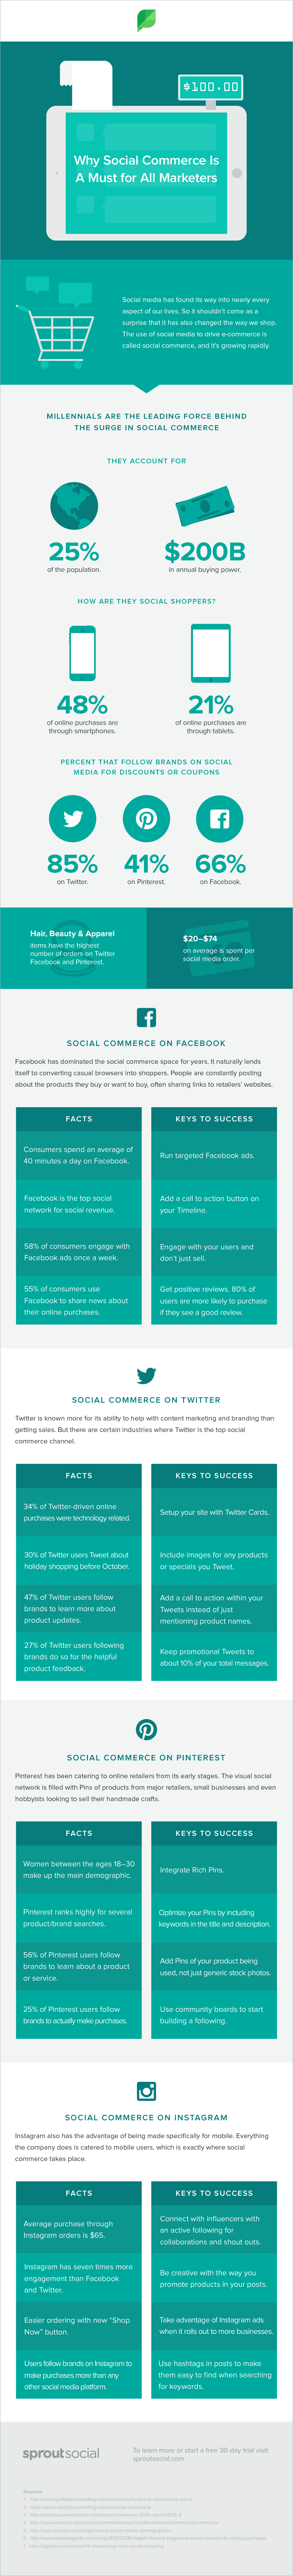 social commerce infographic